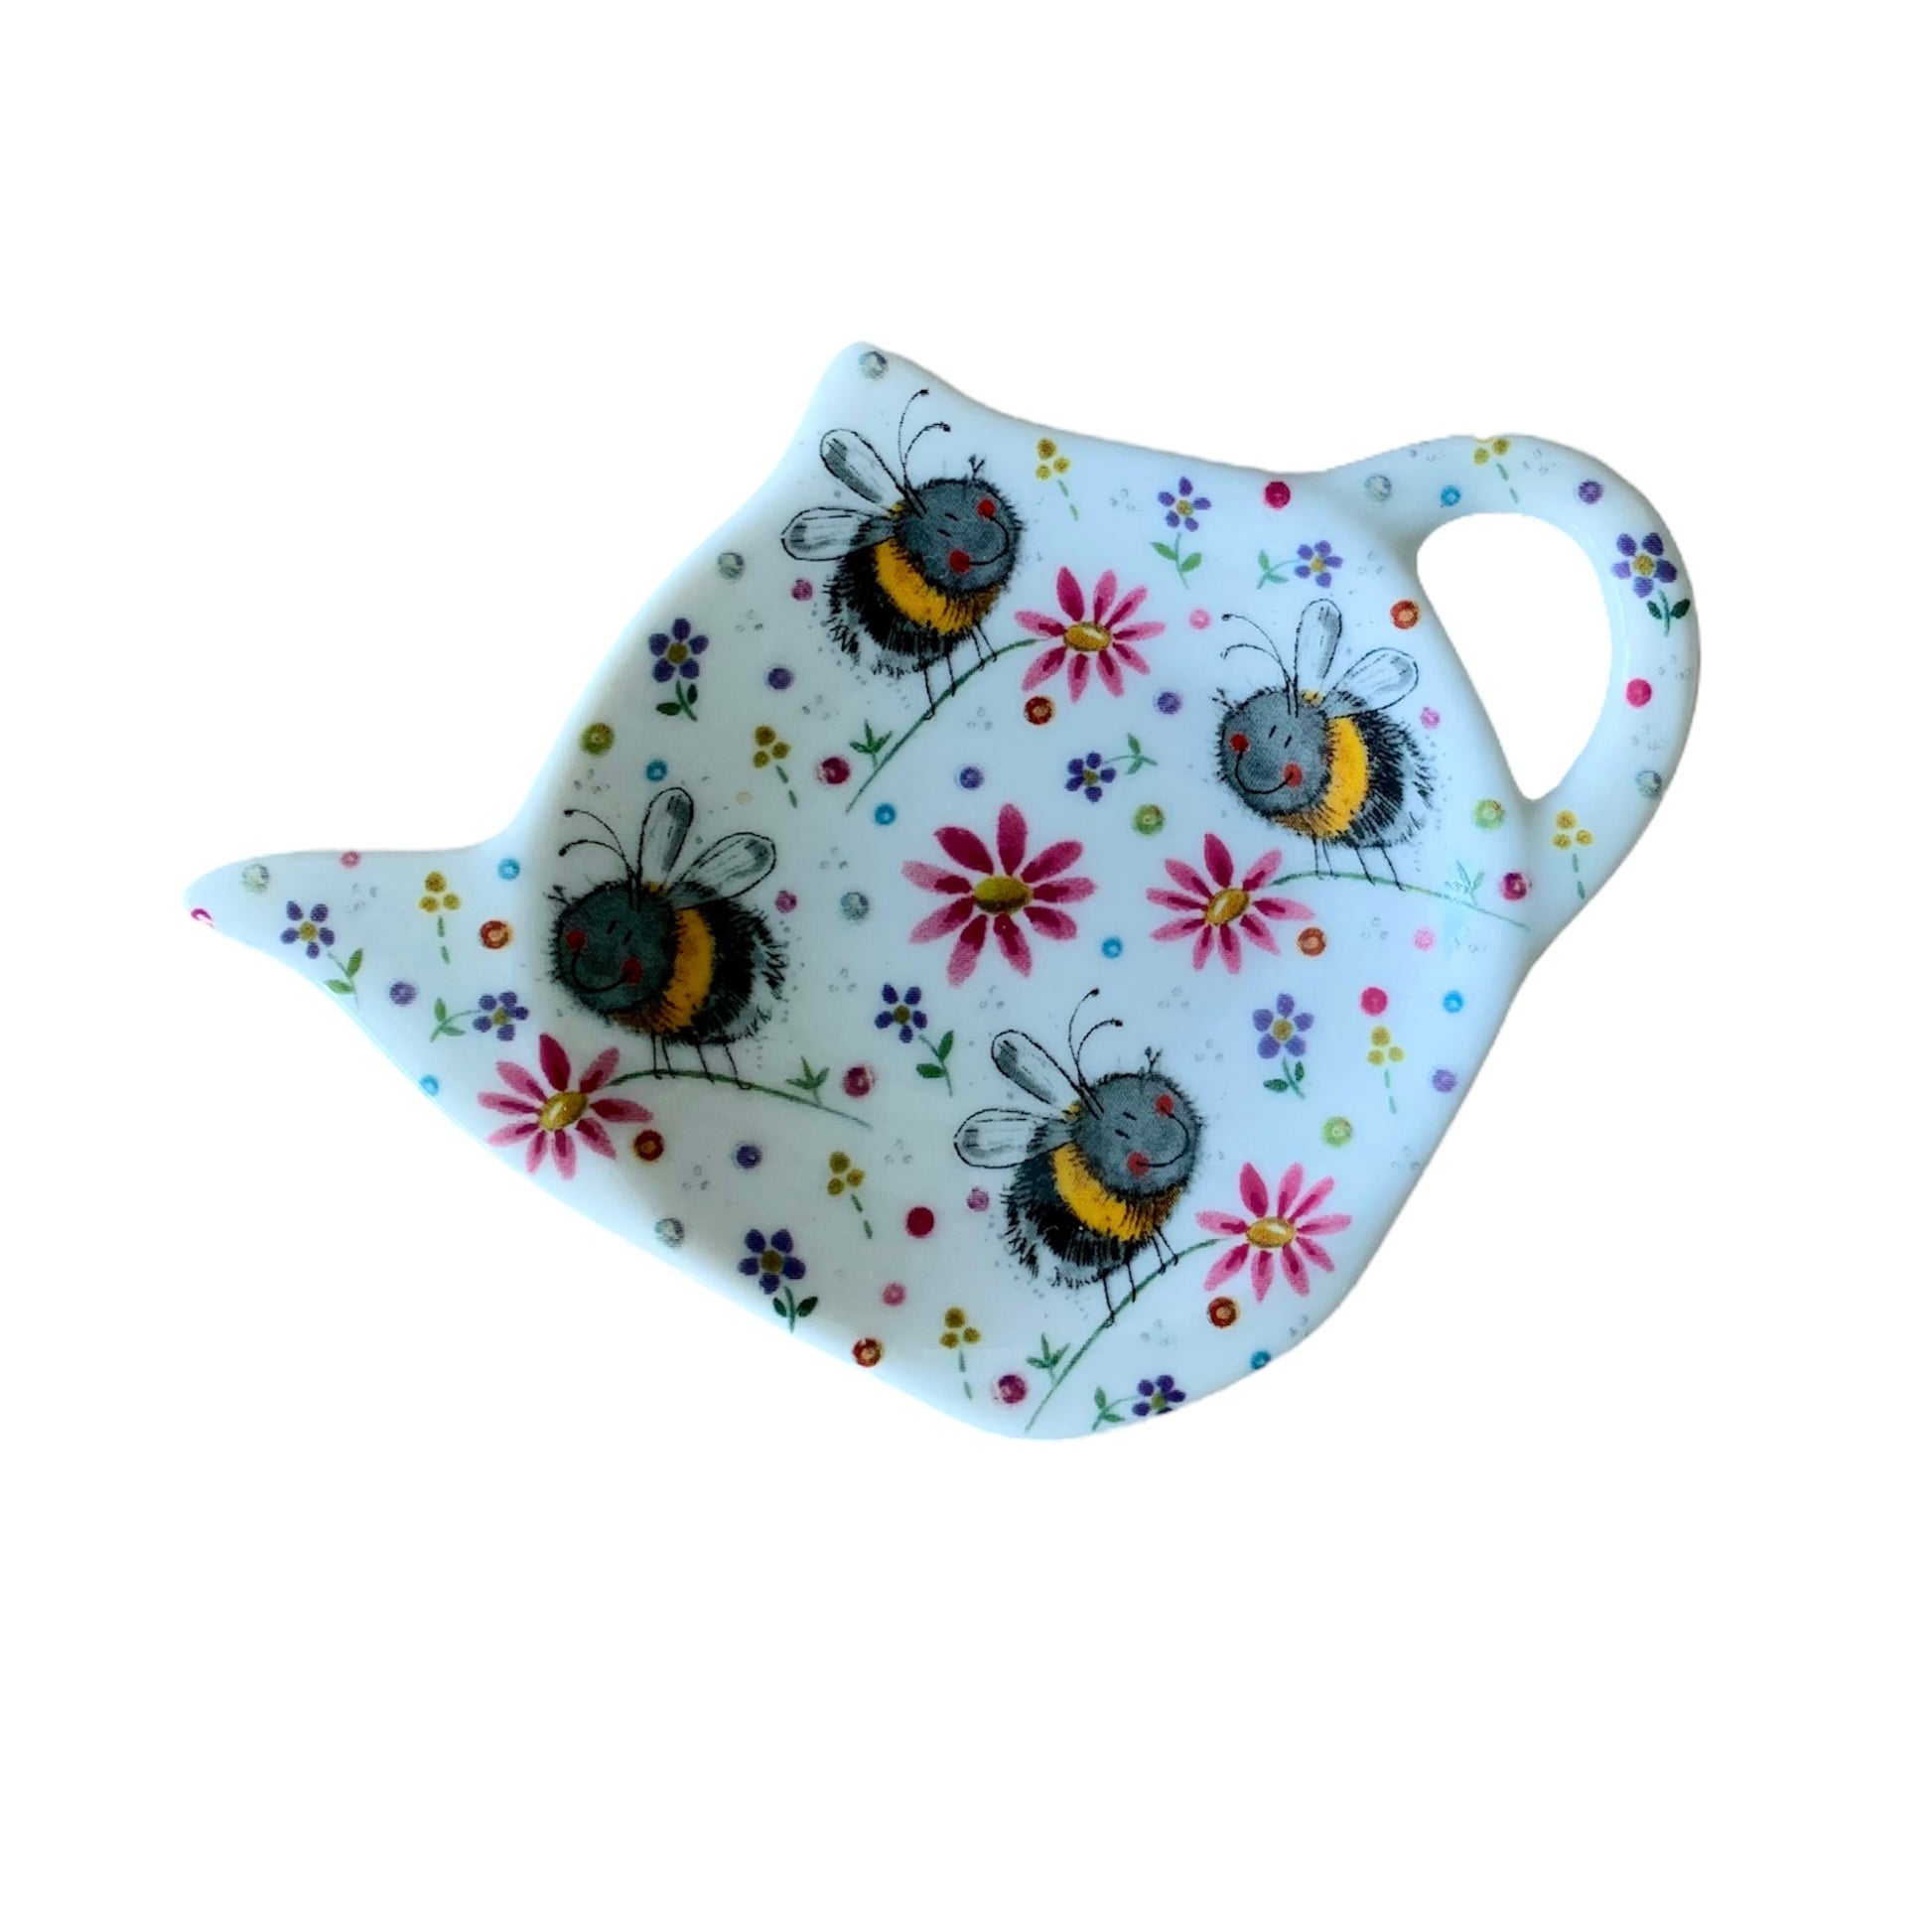 This Alex Clark teabag tidy is illustrated with bumble bees in a meadow of flowers There is also a matching teapot & mugs in the same illustration.